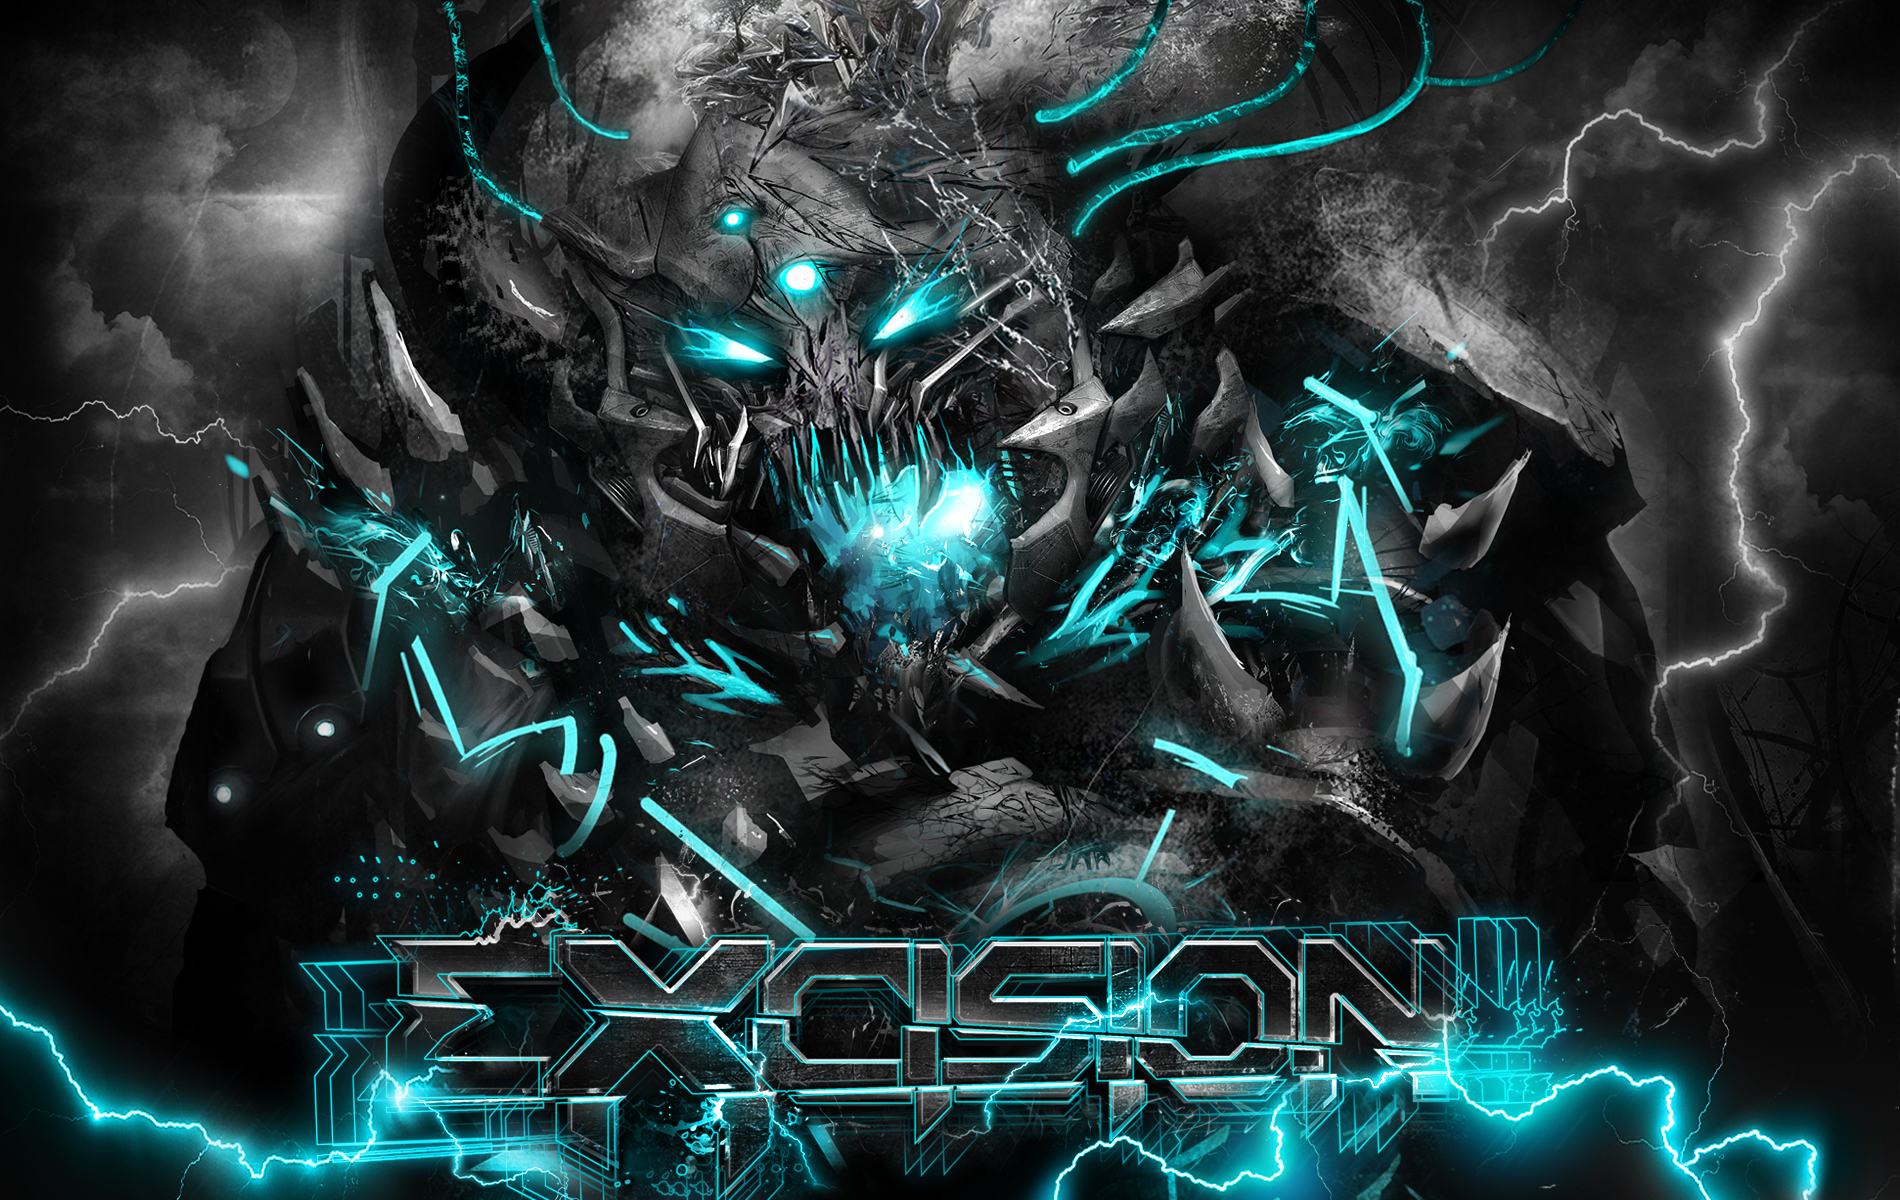 5 Excision HD Wallpapers Backgrounds 1900x1200. 